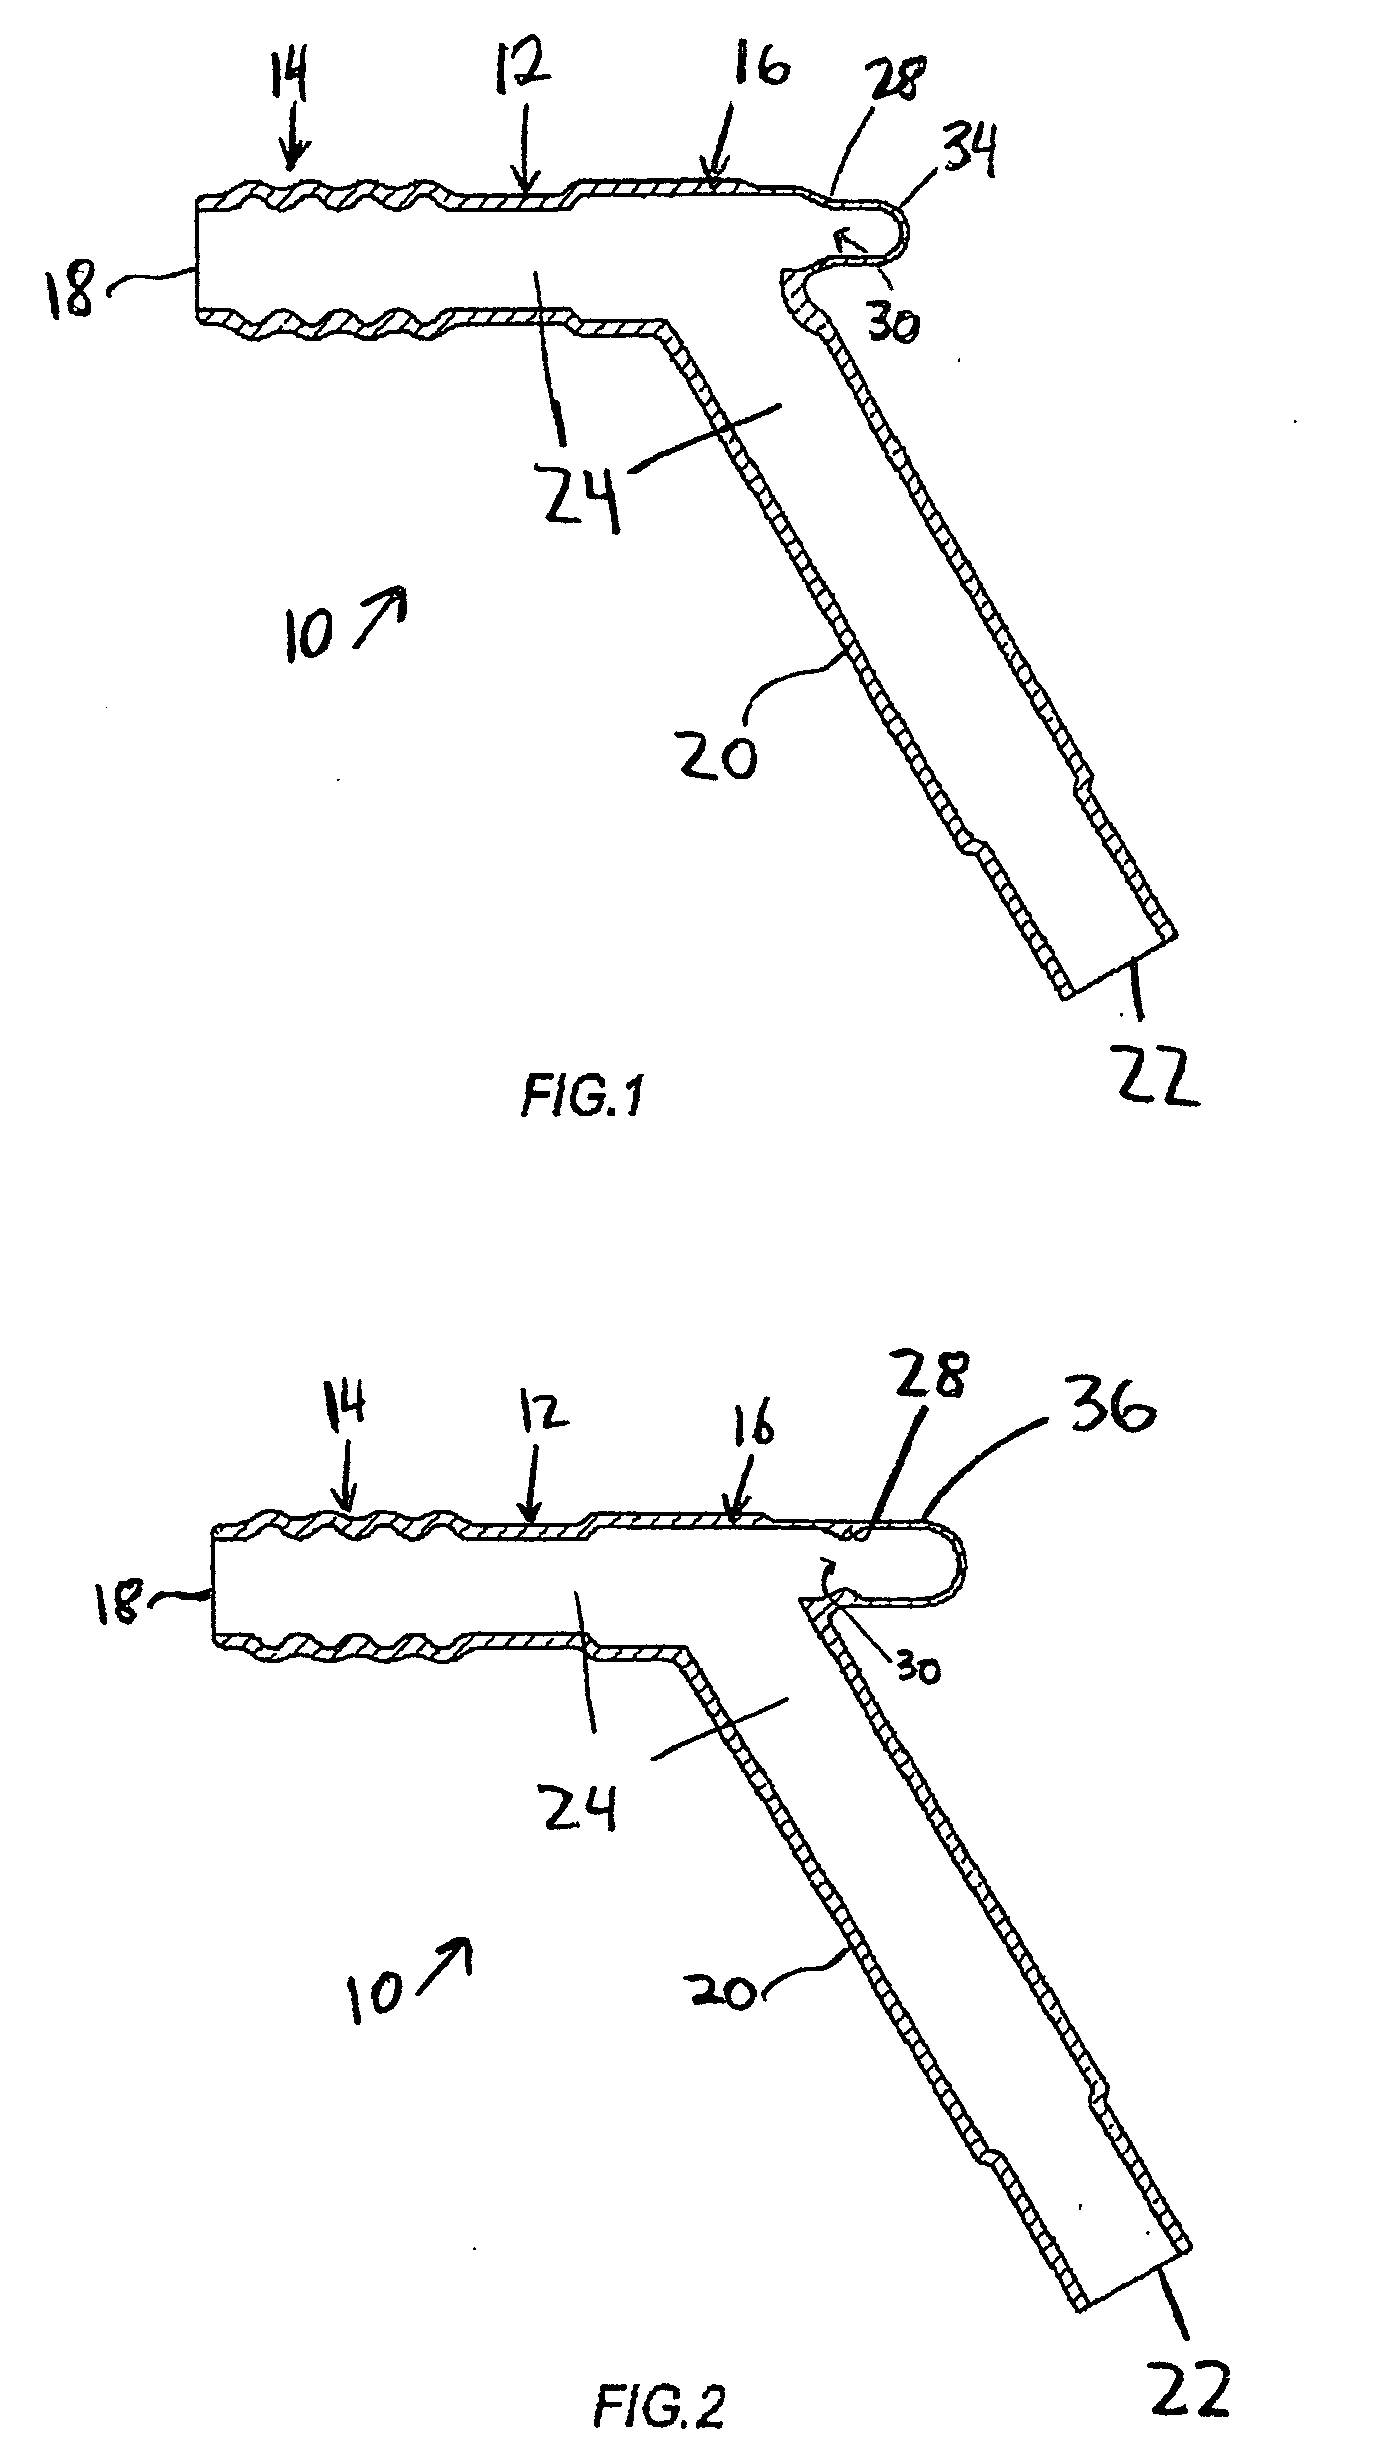 Device and method for colonic lavage